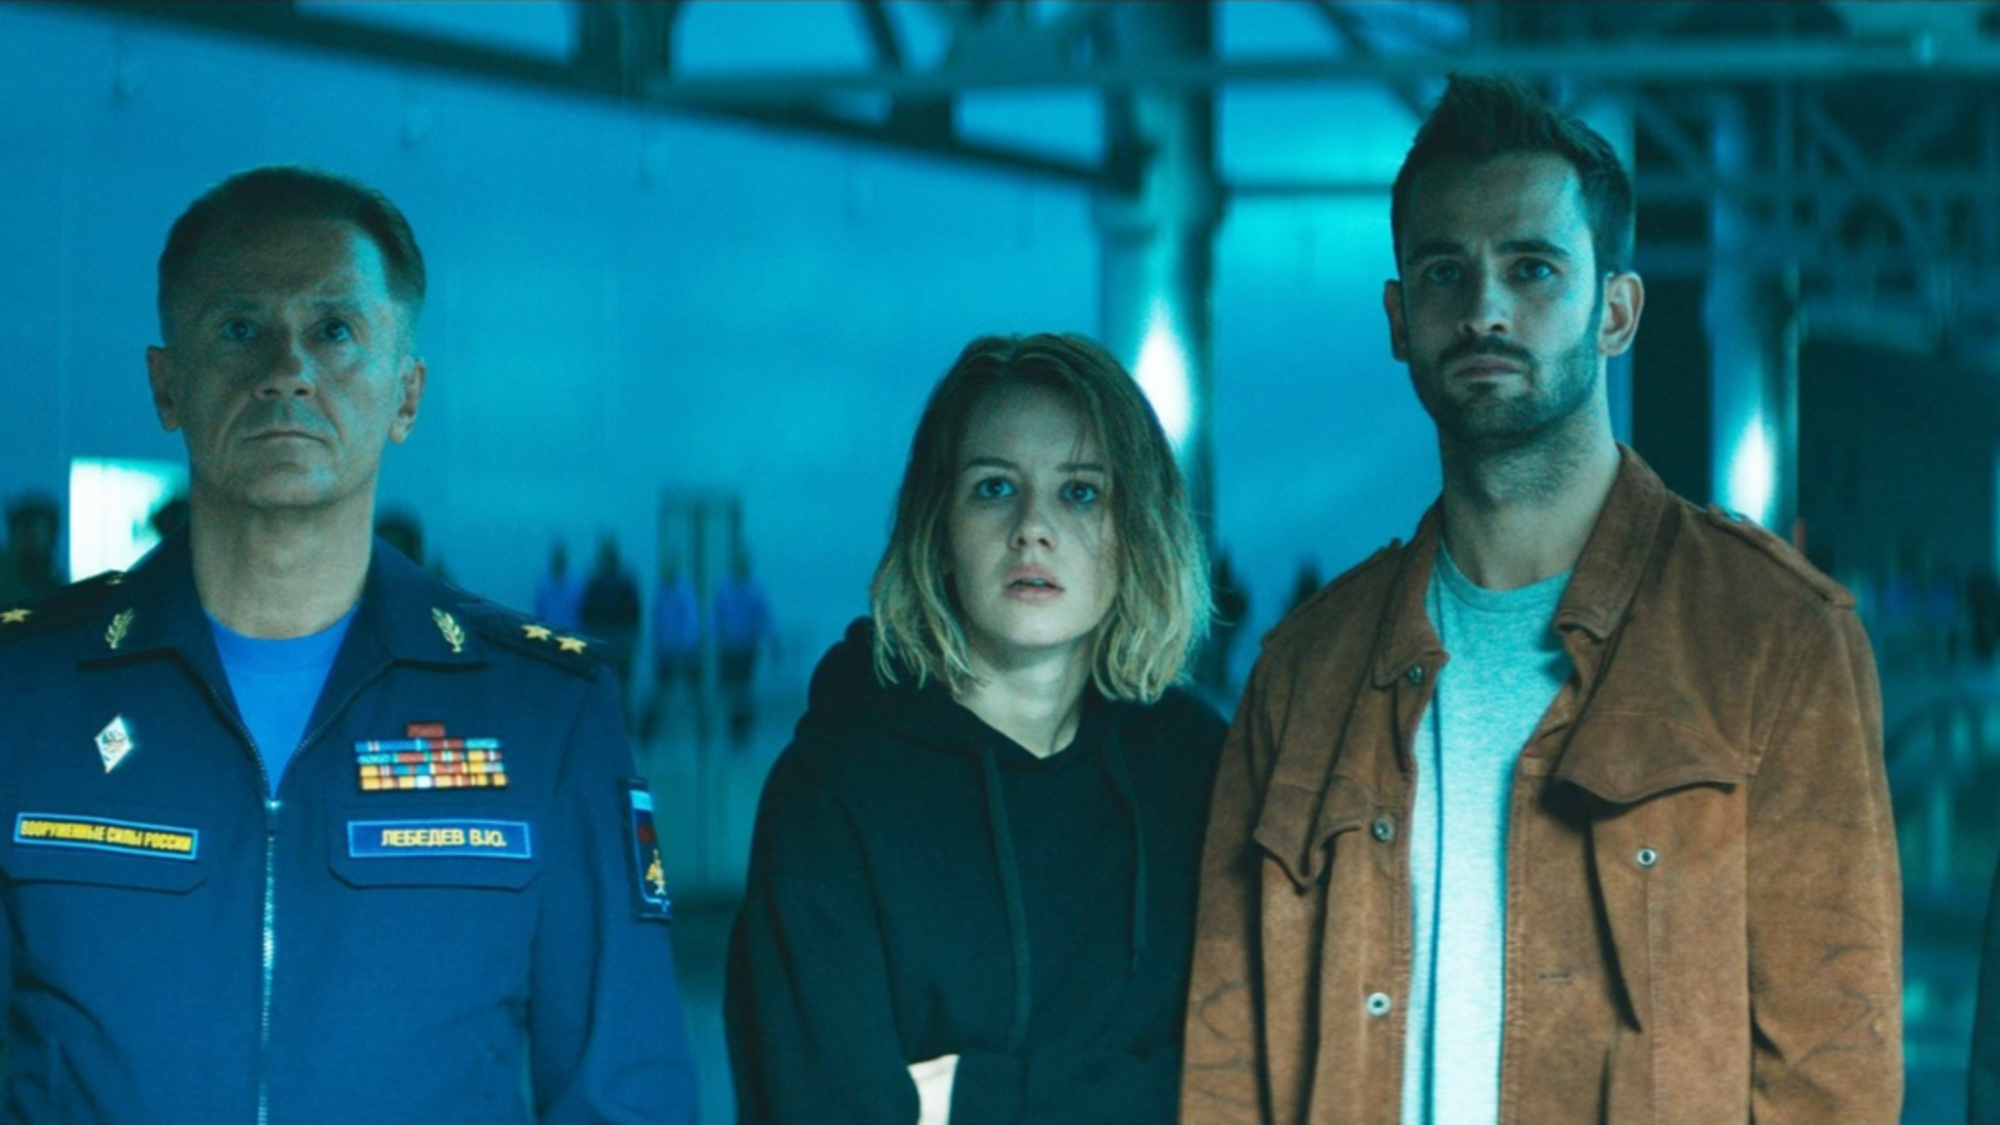 Movie Review: Does 'Attraction 2: Invasion' Satisfy As A Sequel? — Eclectic Pop